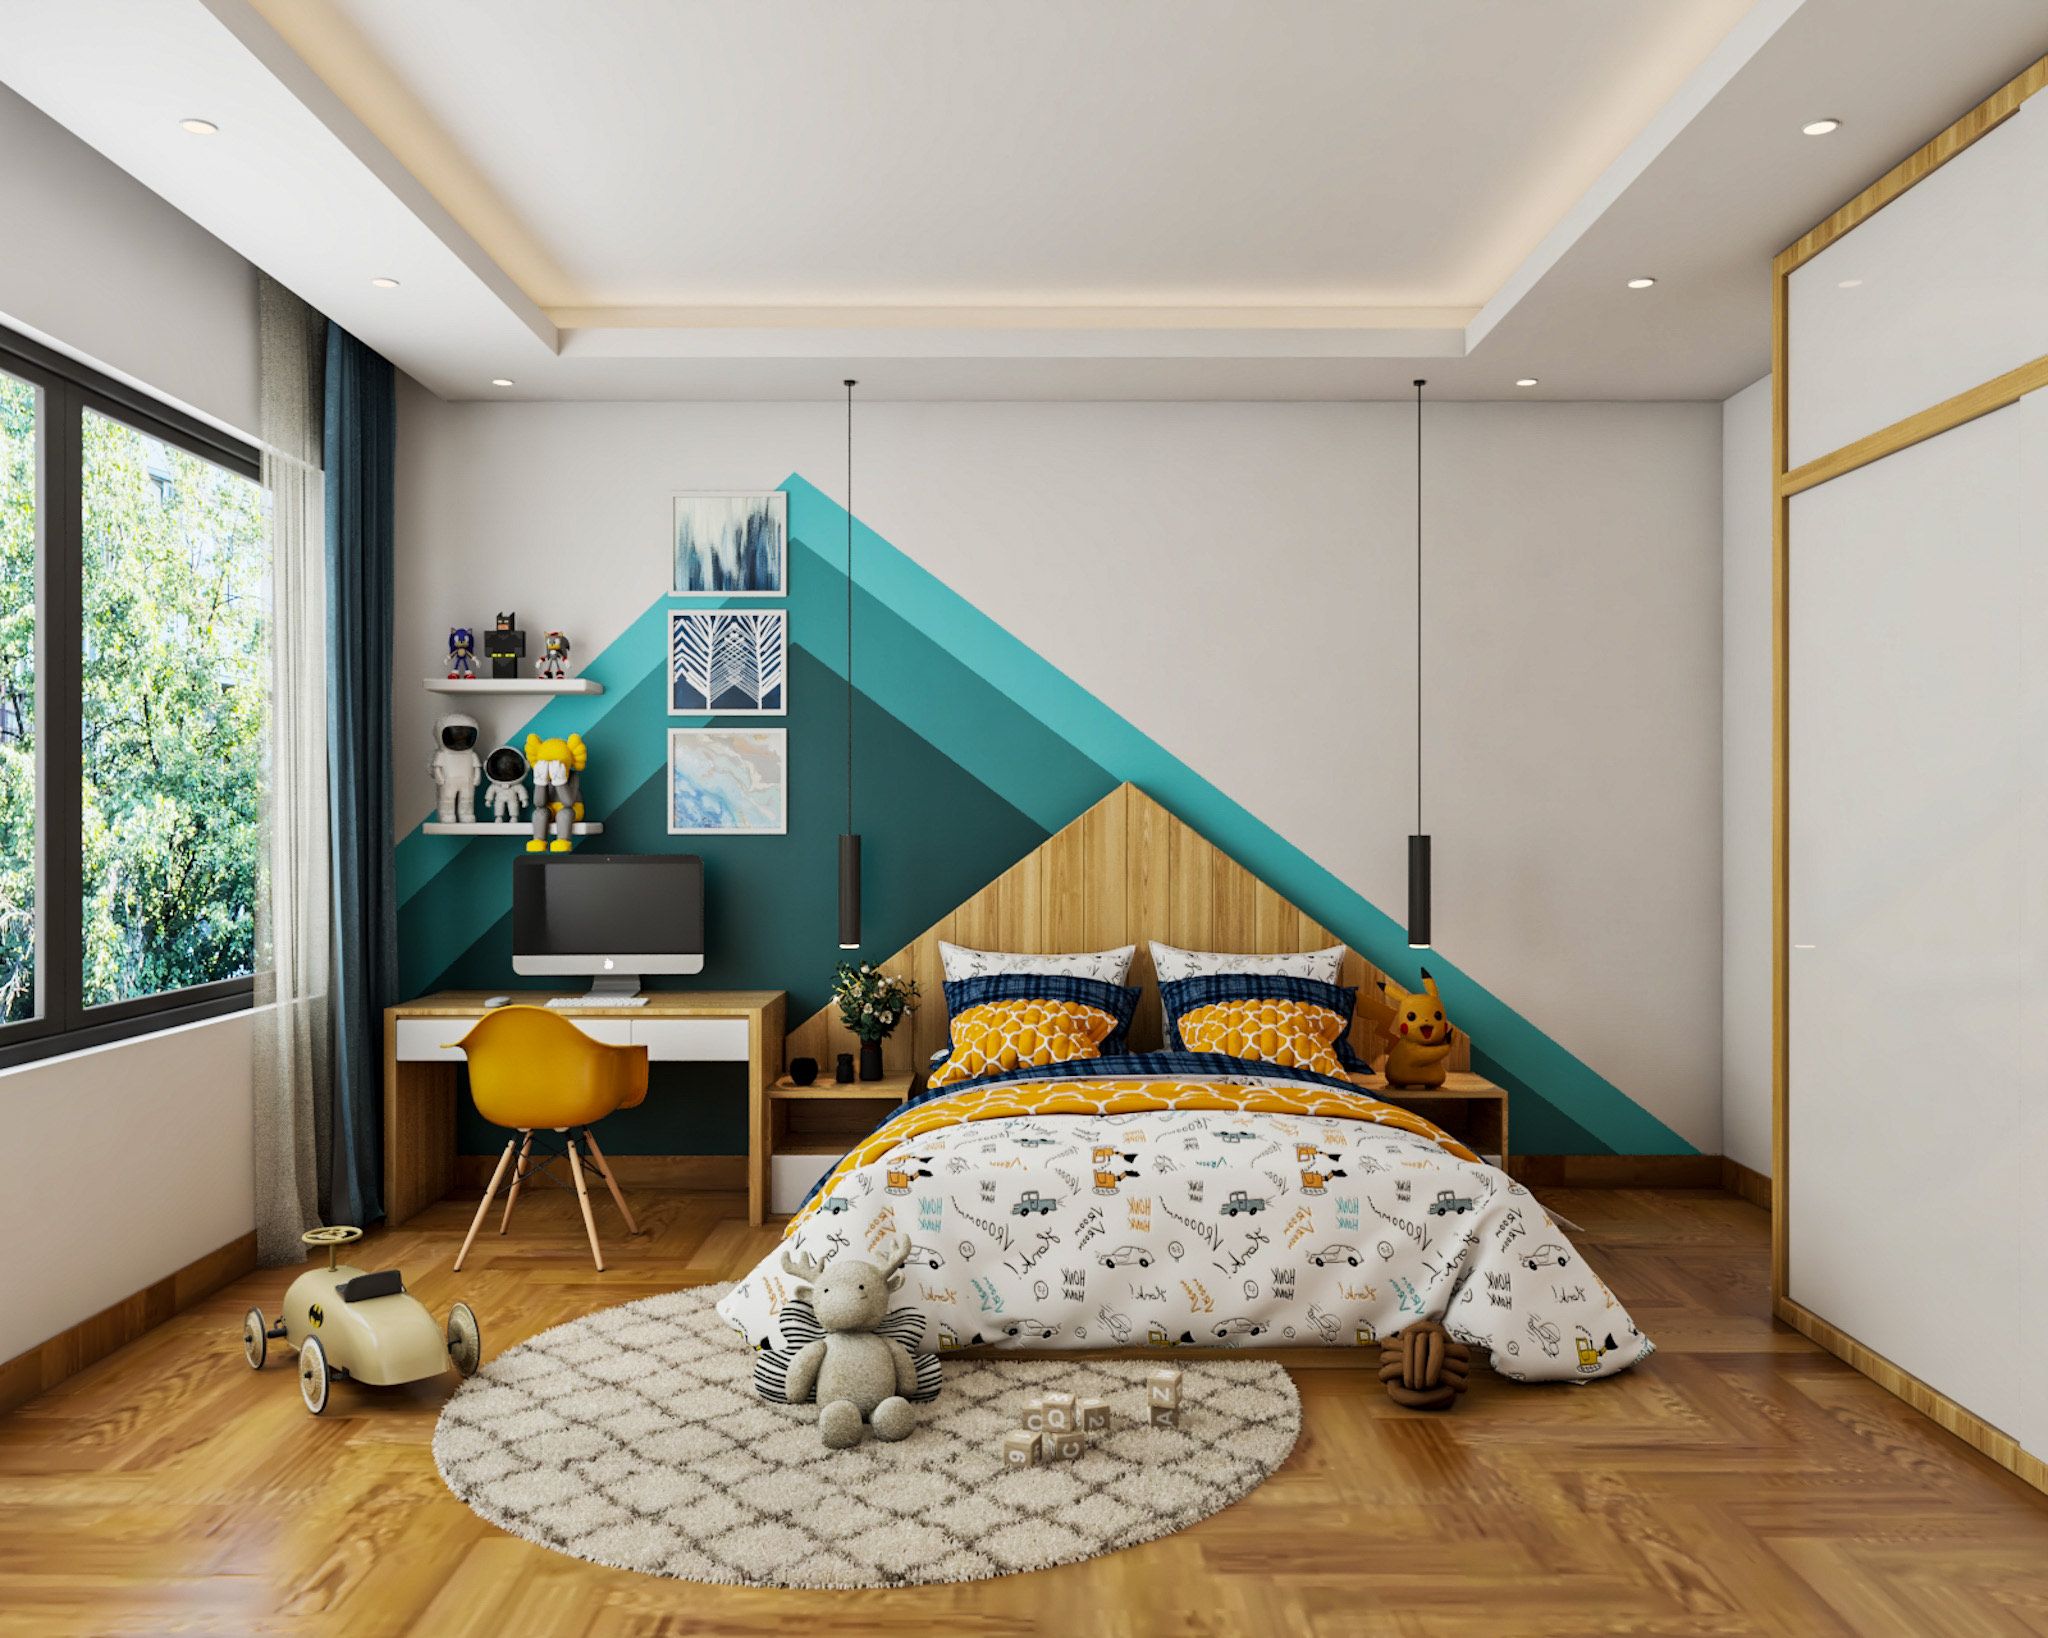 Modern Kids Room Design With A King Size Bed And A Compact Study Unit